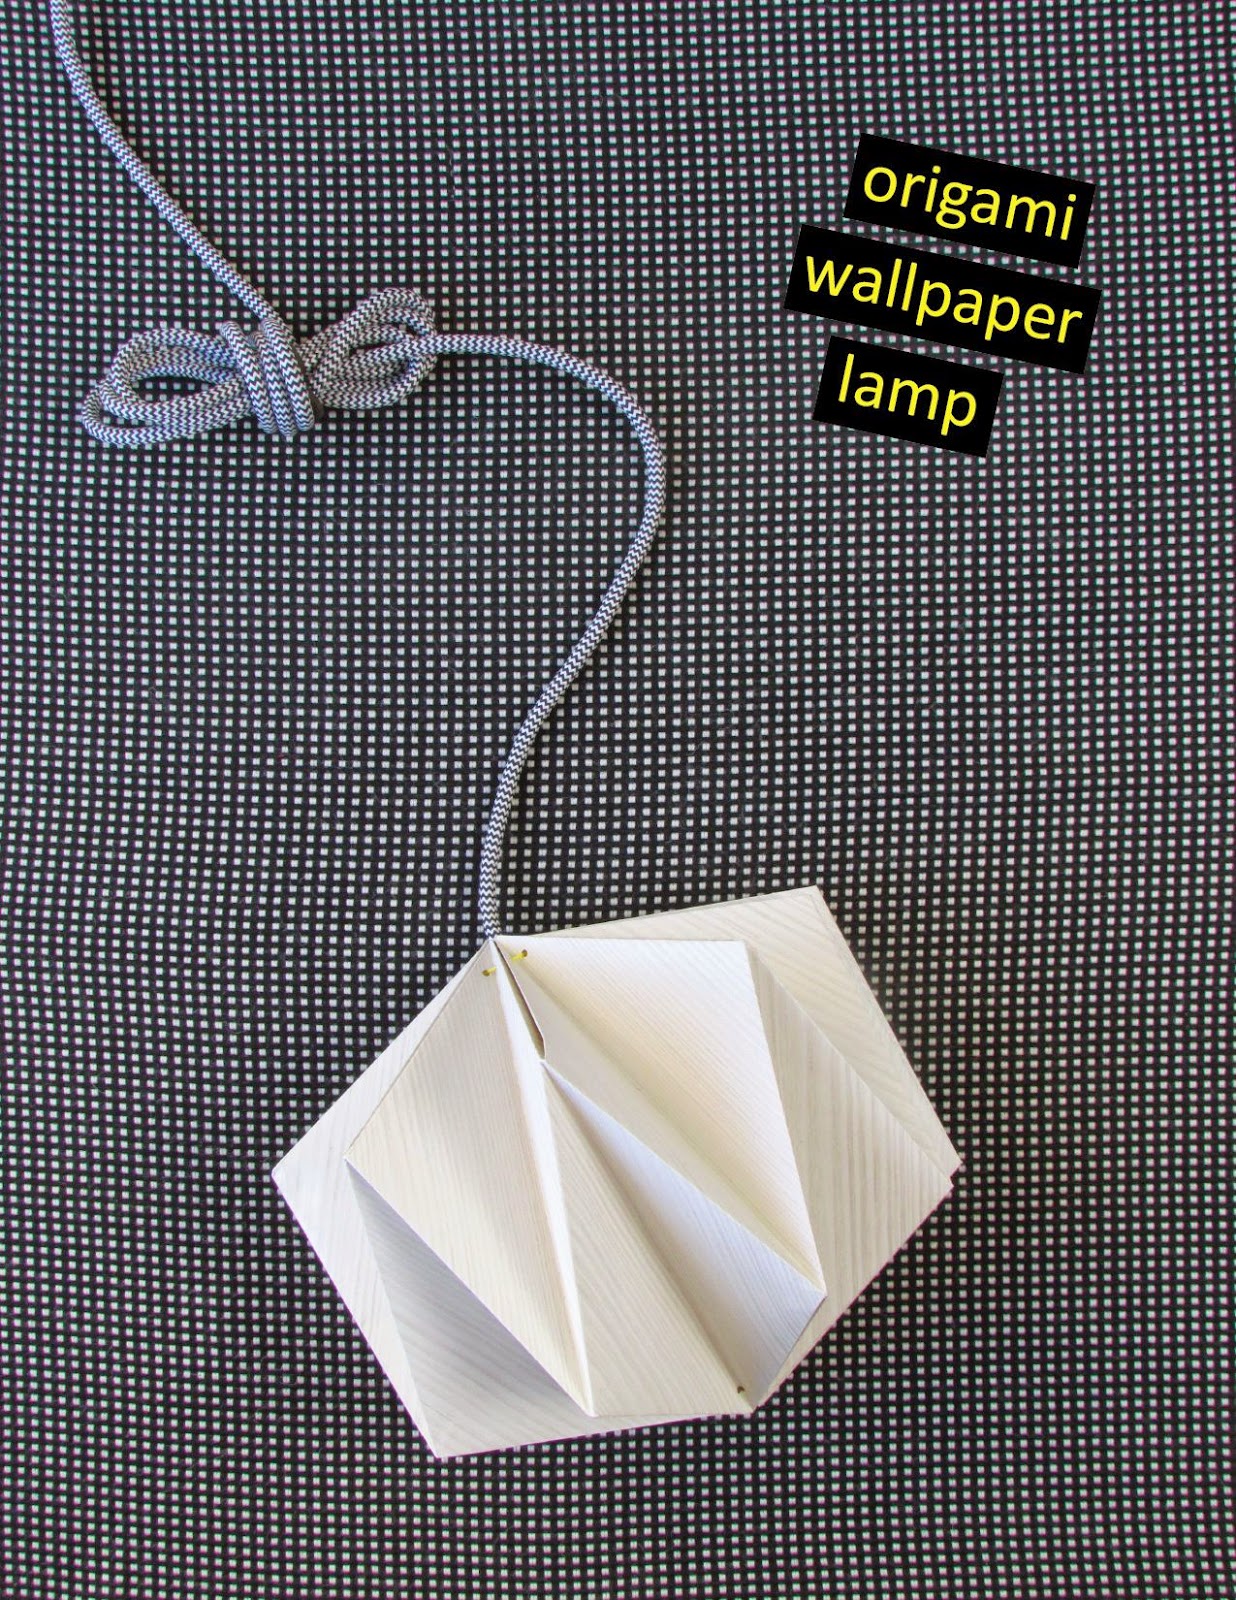 DIY Origami lampshade from paper 99create